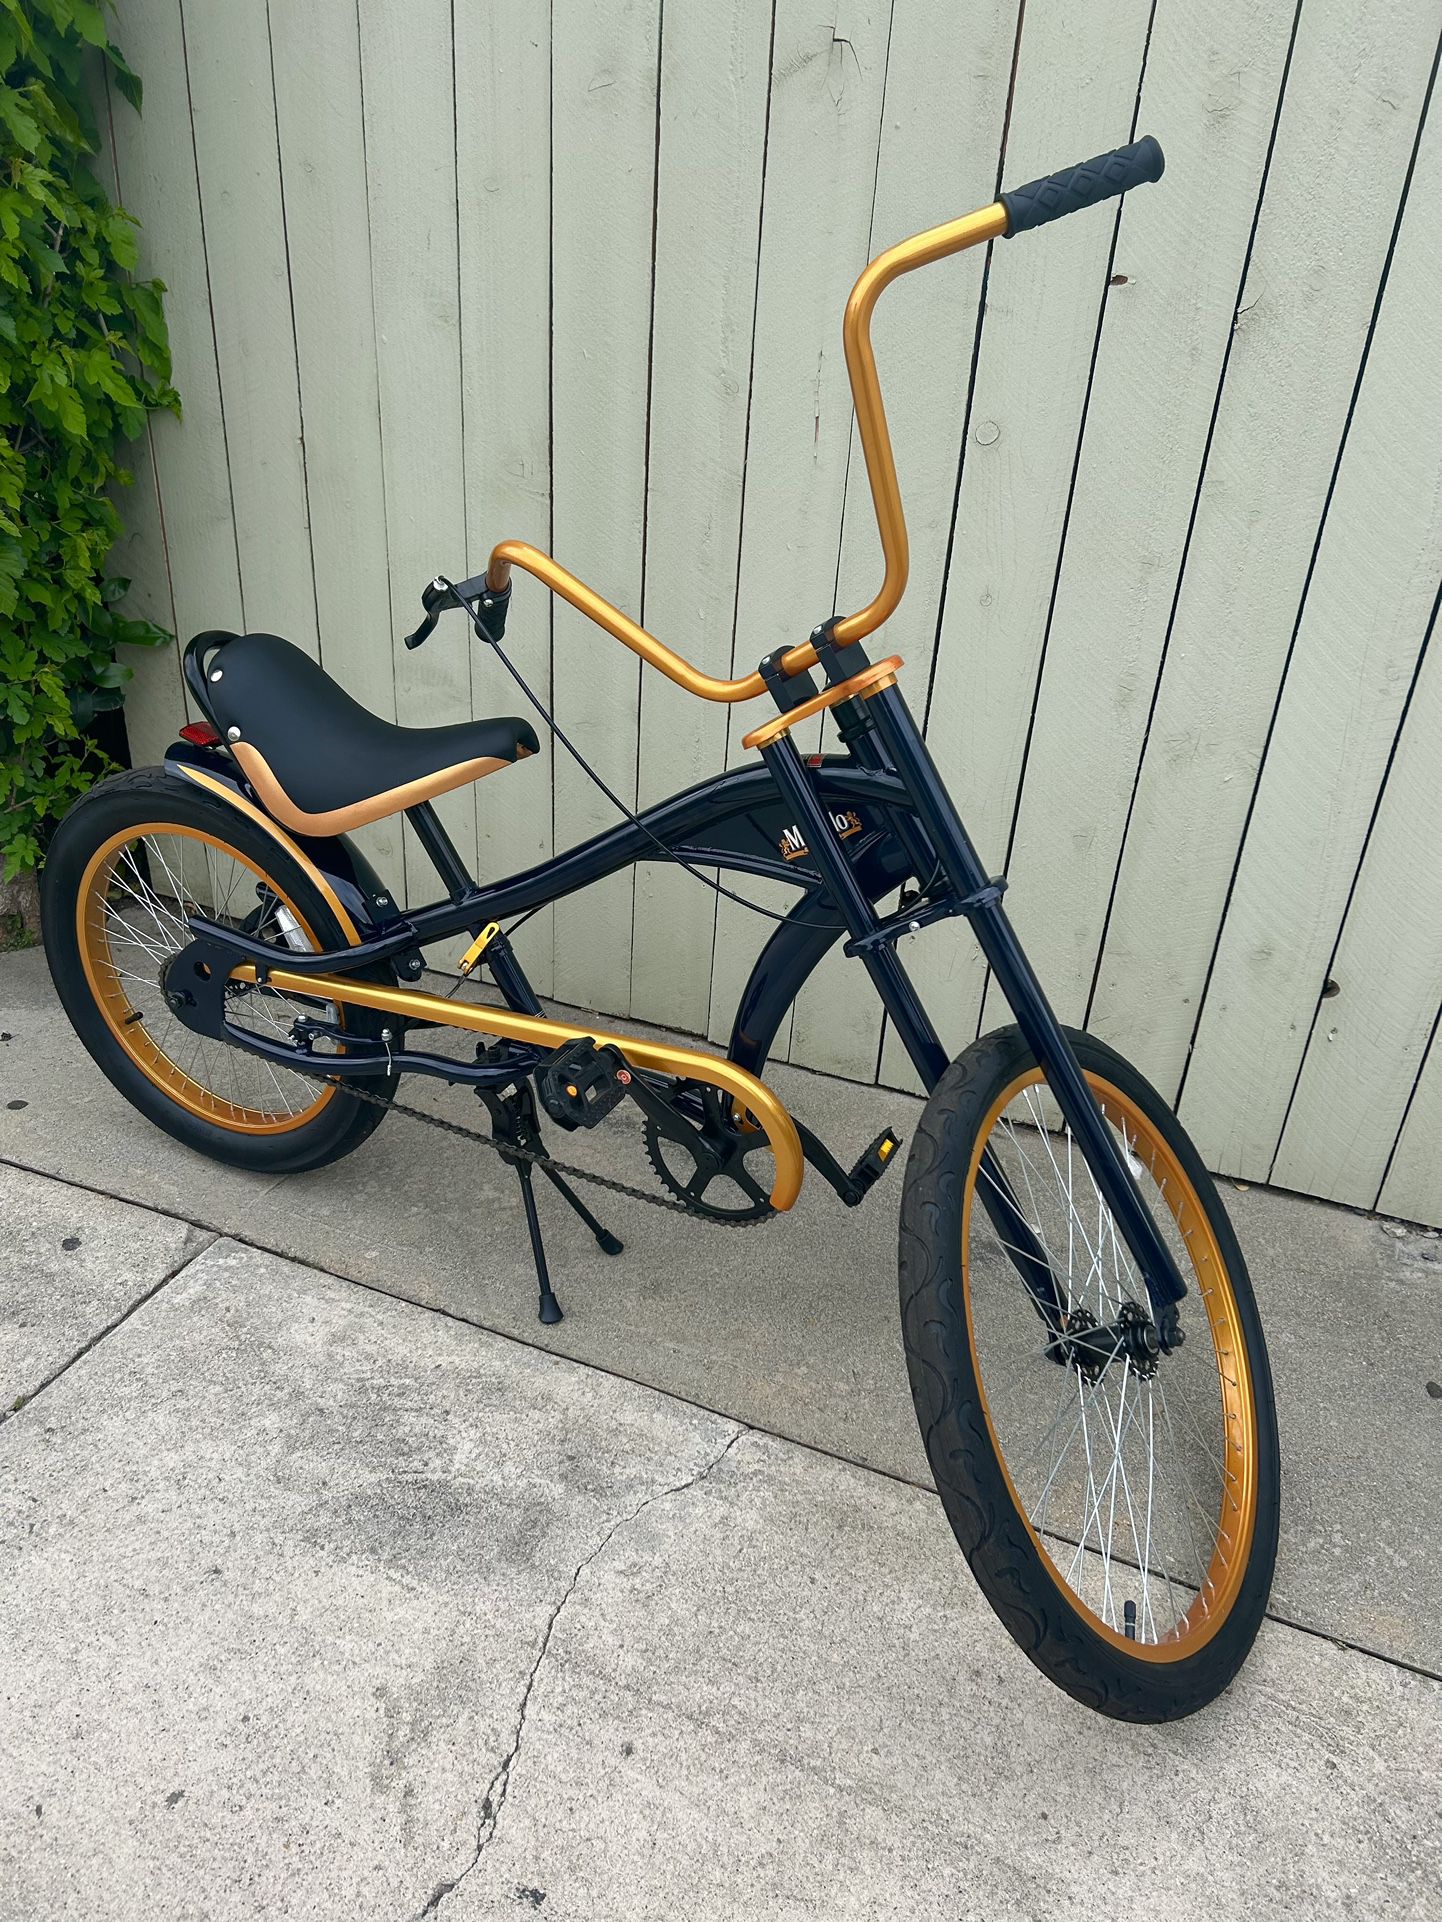 This Bike Has Swag-Modelo Chopper Bike-only Serious Buyers Please 